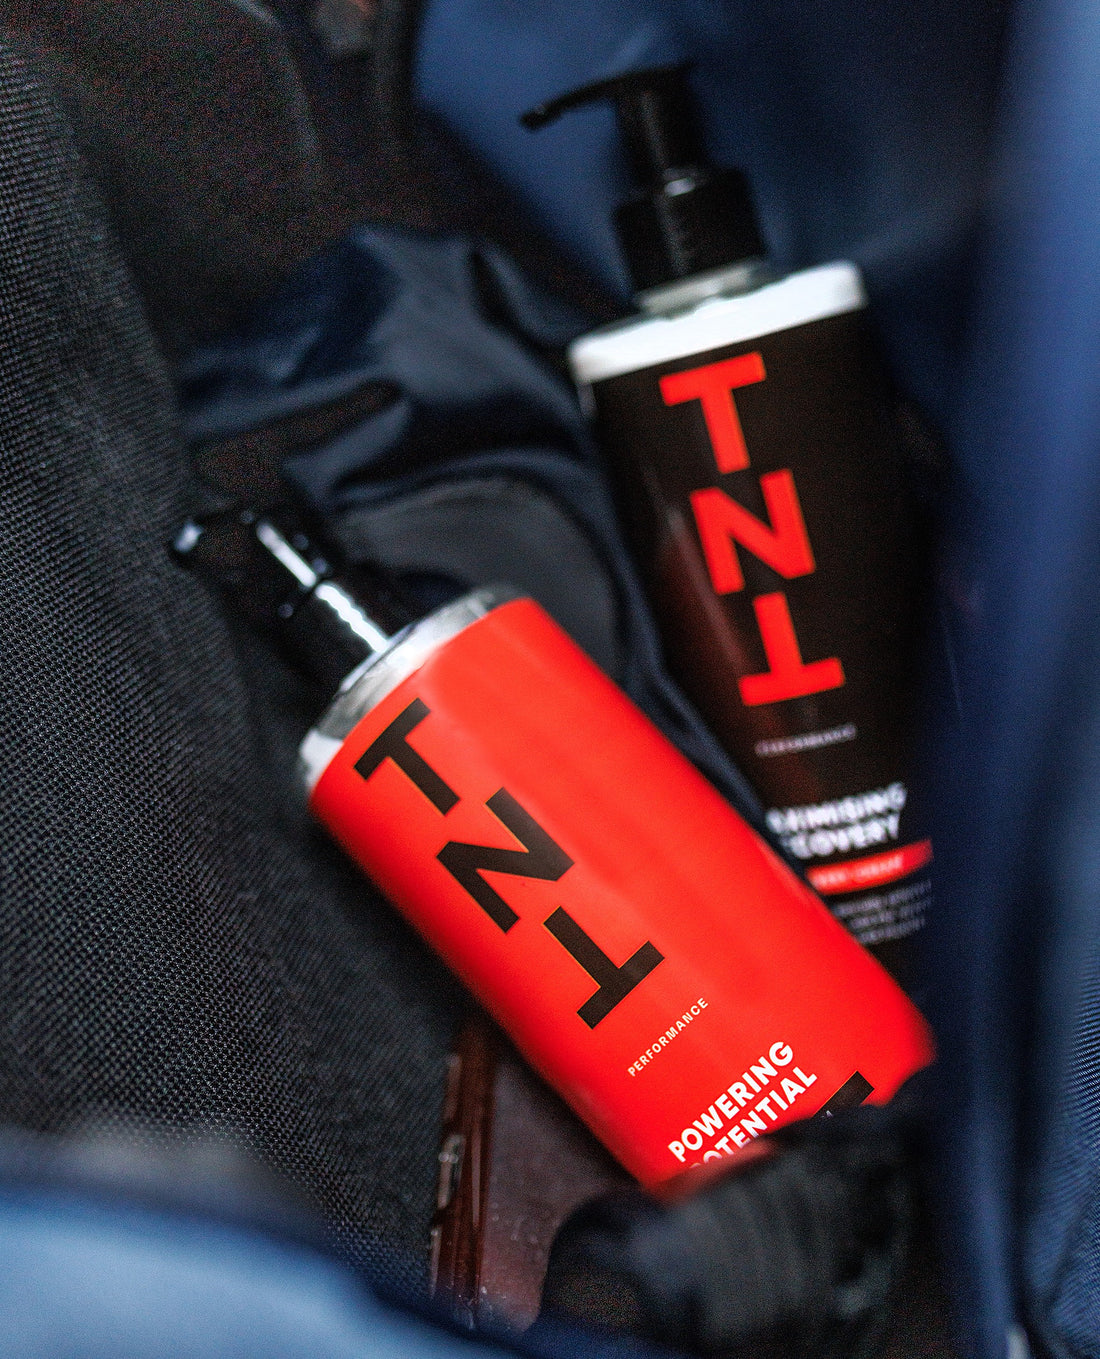 Why TNT Performance Cream Should Be in Your Gym Bag